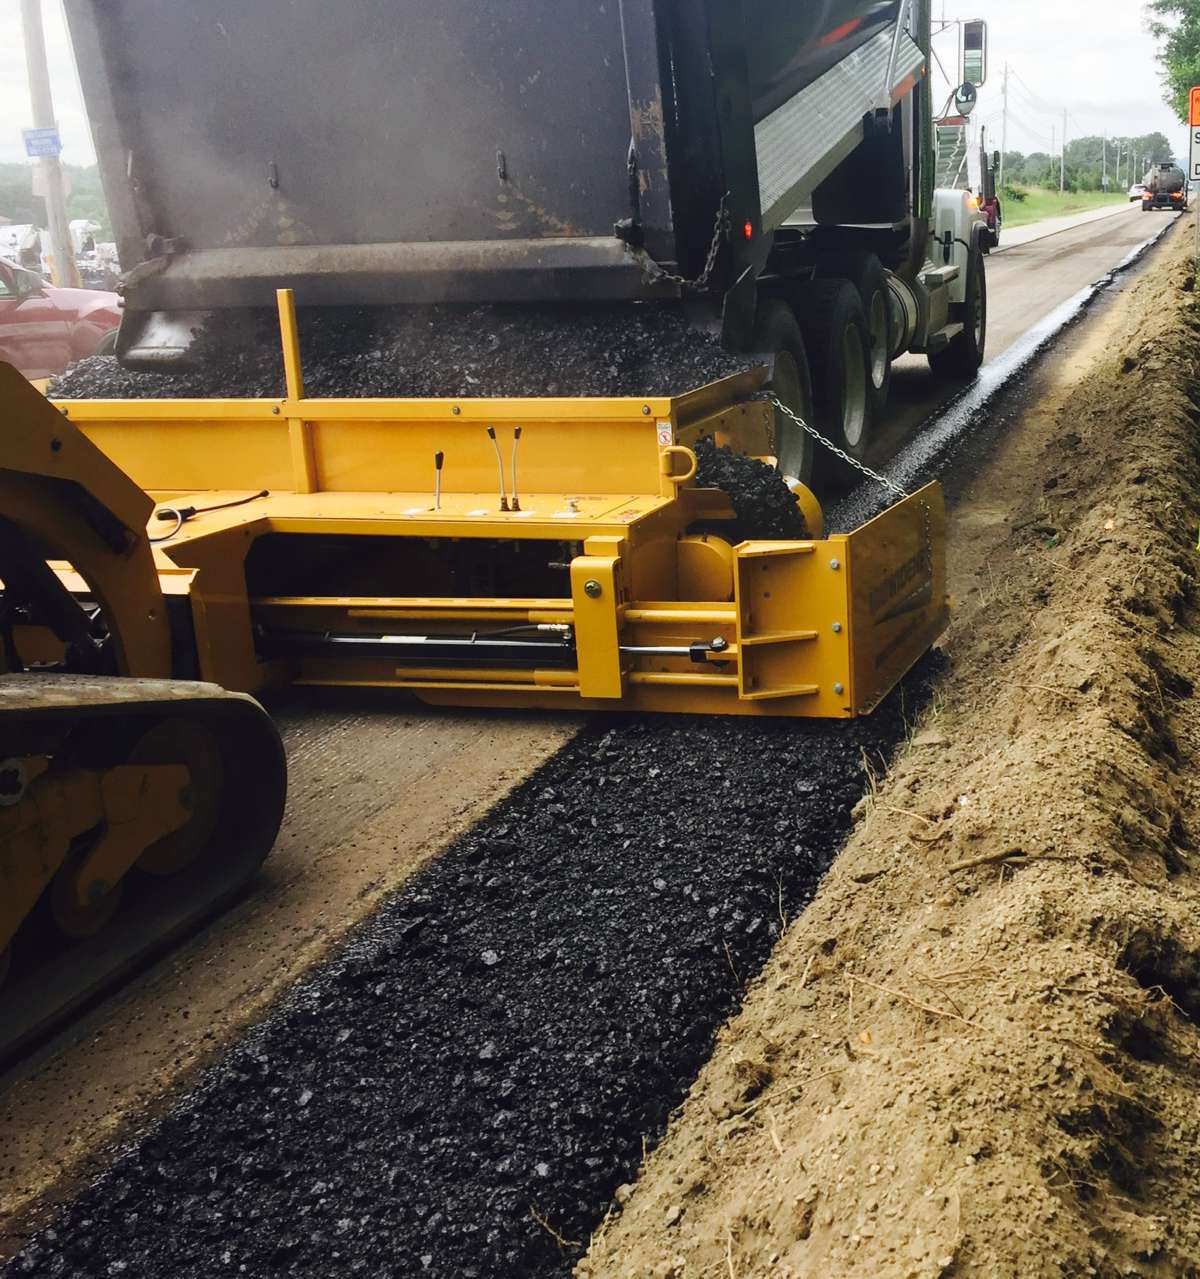 ODOT used the Road Widener FH-R skid steer attachment to efficiently disperse material from a dump truck to the material box, and then carefully onto the roadway. Using it resulted in increased efficiency, reduced labor and decreased costs.